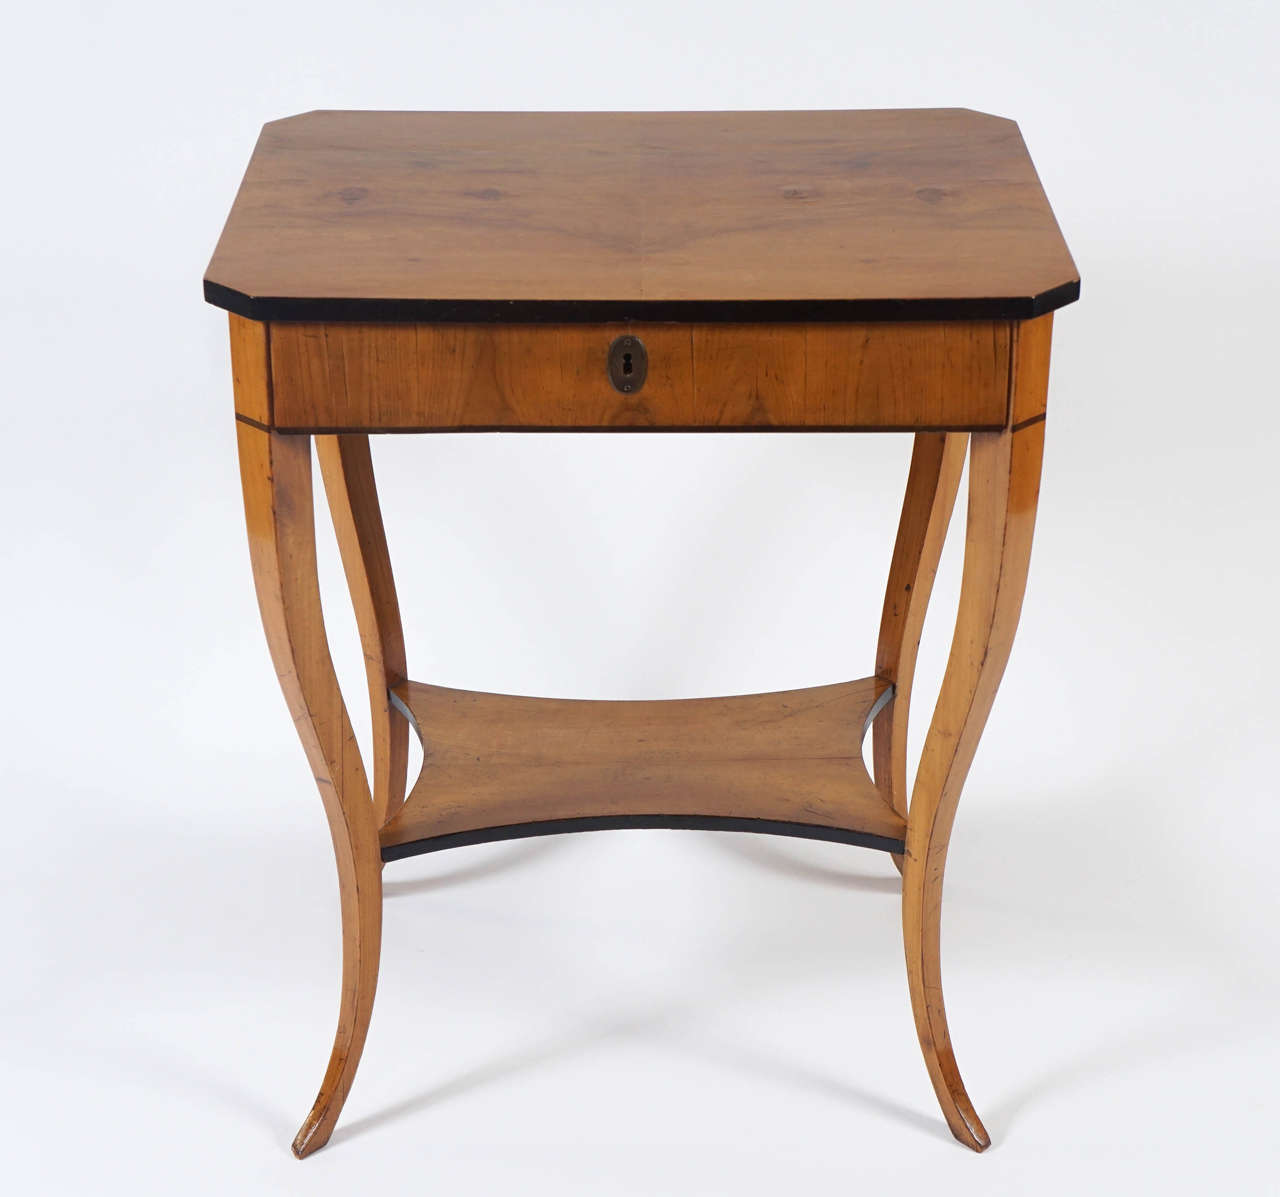 Elegant early Austrian Biedermeier period walnut occasional table or Stand having rectangular top with canted corners and ebonized edges surmounting single drawer with original oval brass escutcheon on gently undulating splayed legs joined by a